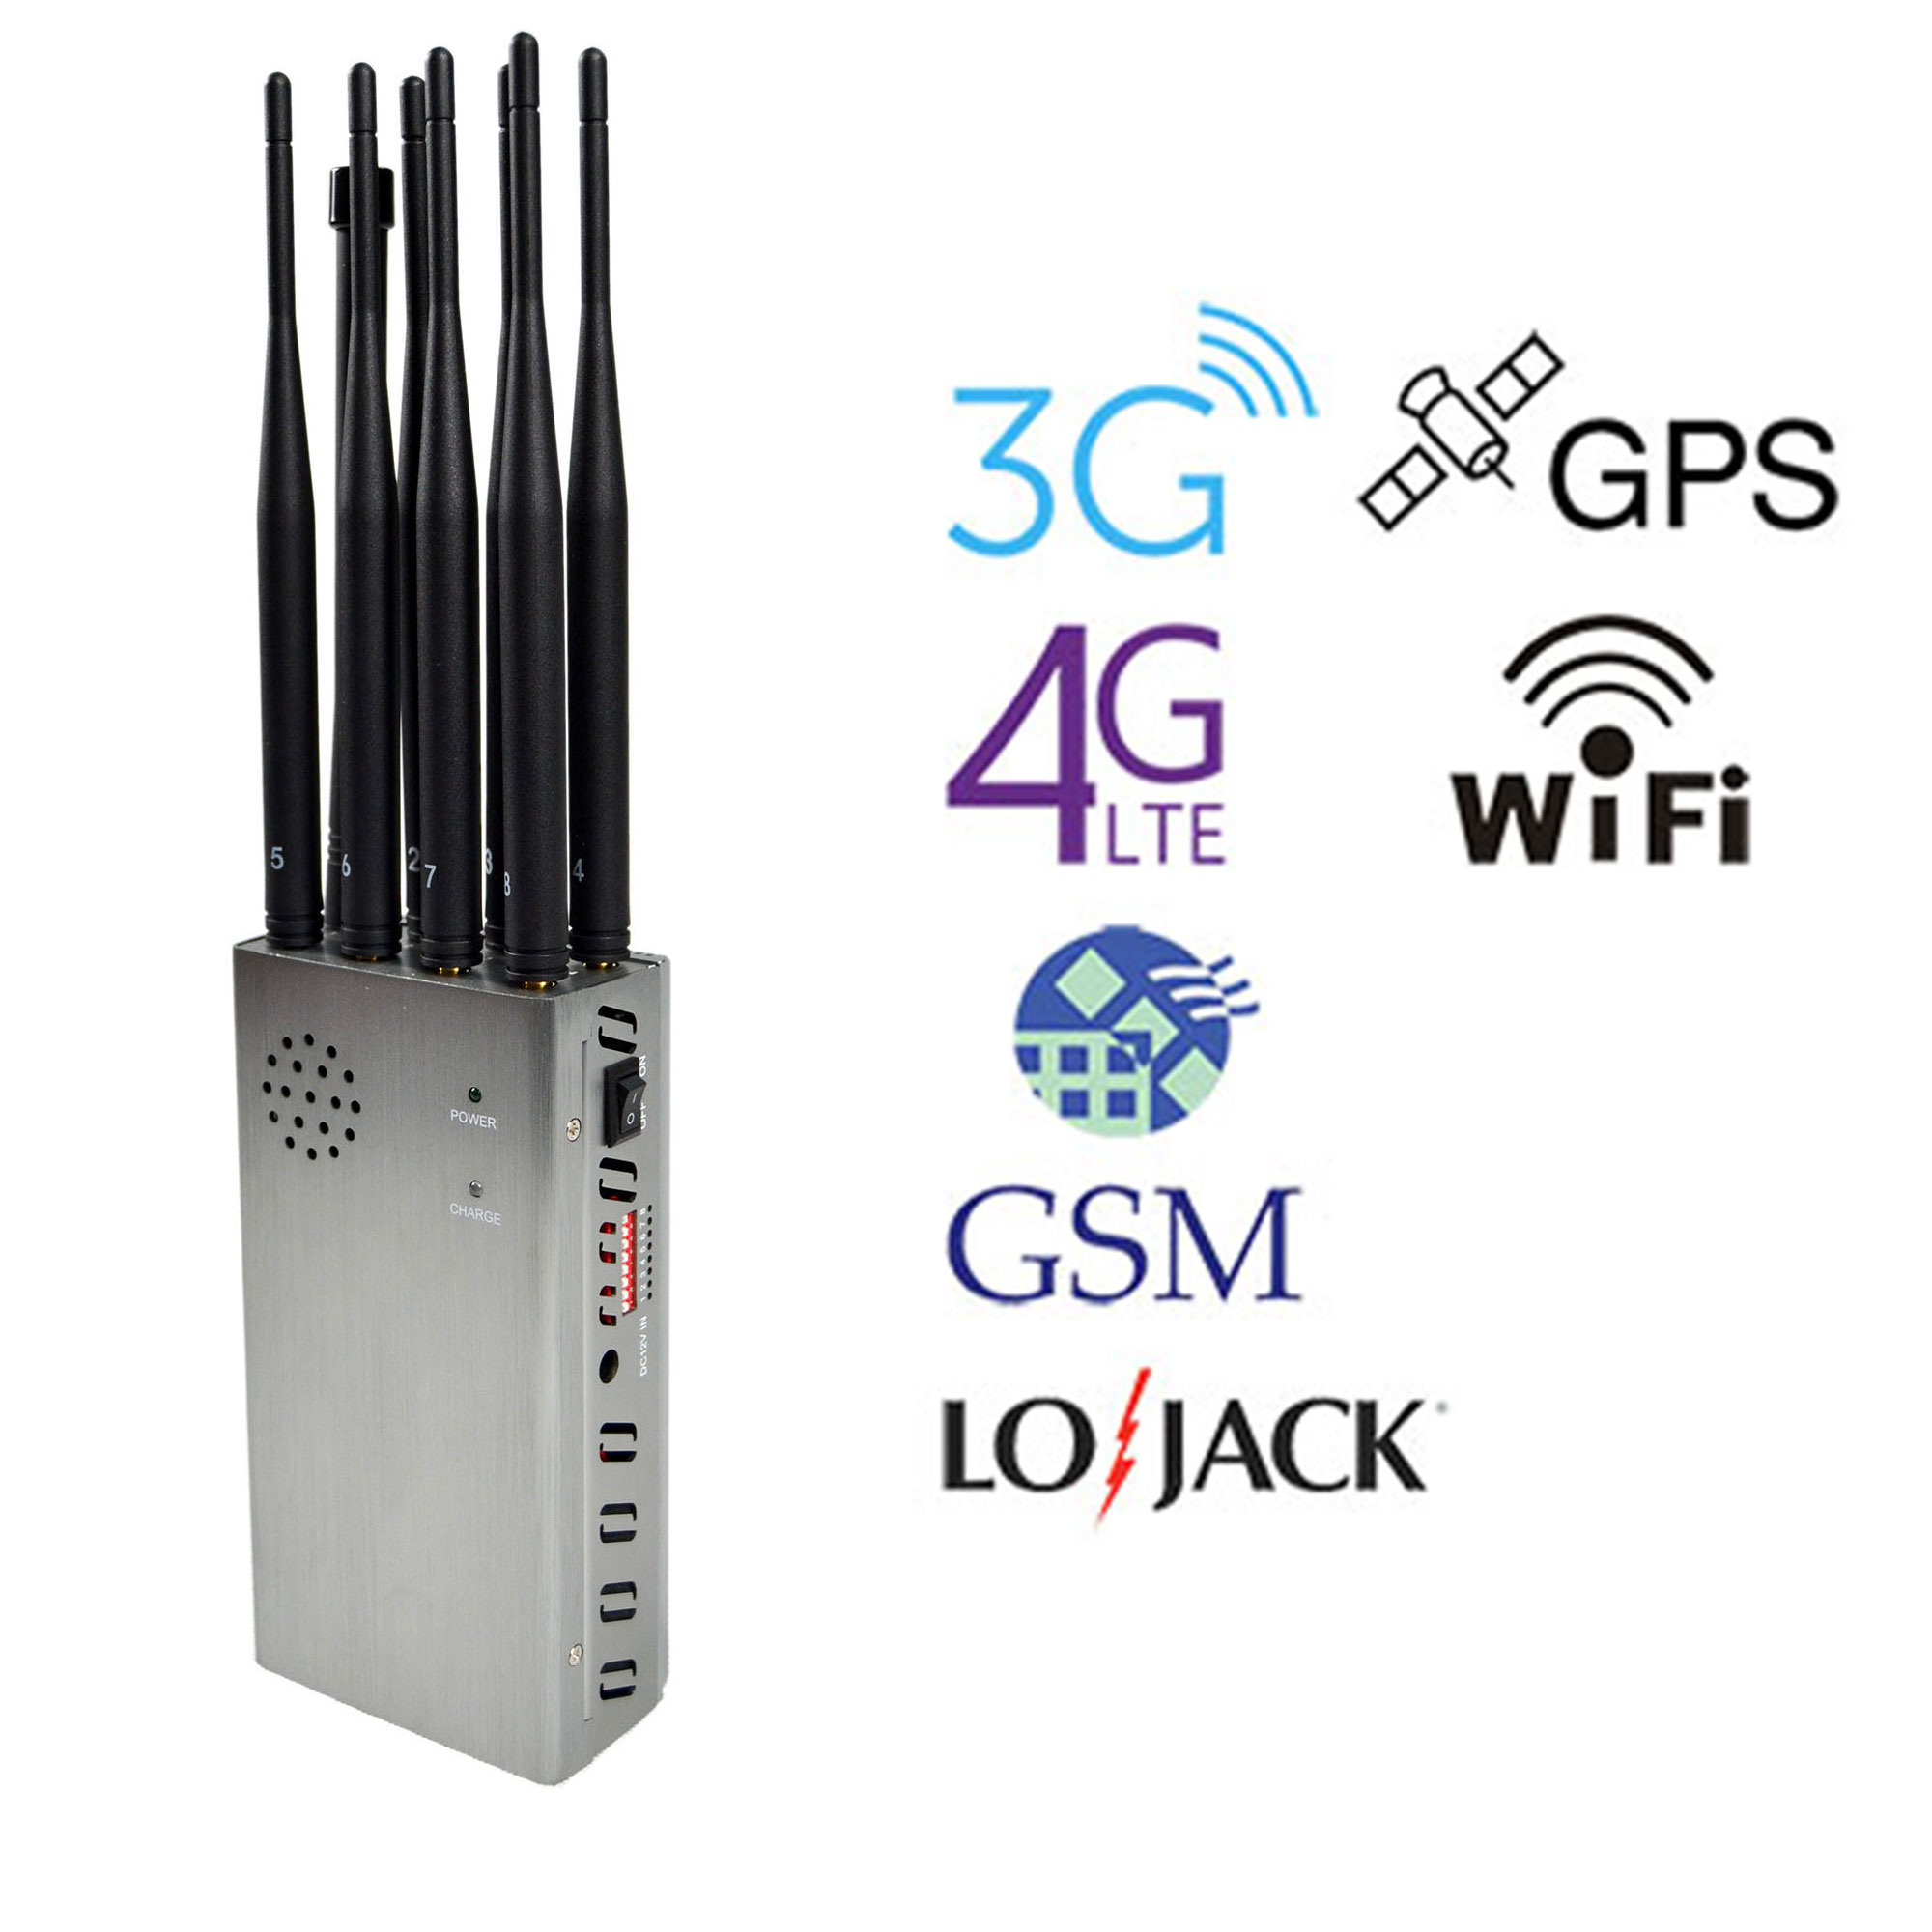 rf jammer kit free | Portable 8 Antennas Cell Phone Jammers With 2g 3G 4G And LOJACK GPS WIFI Signals